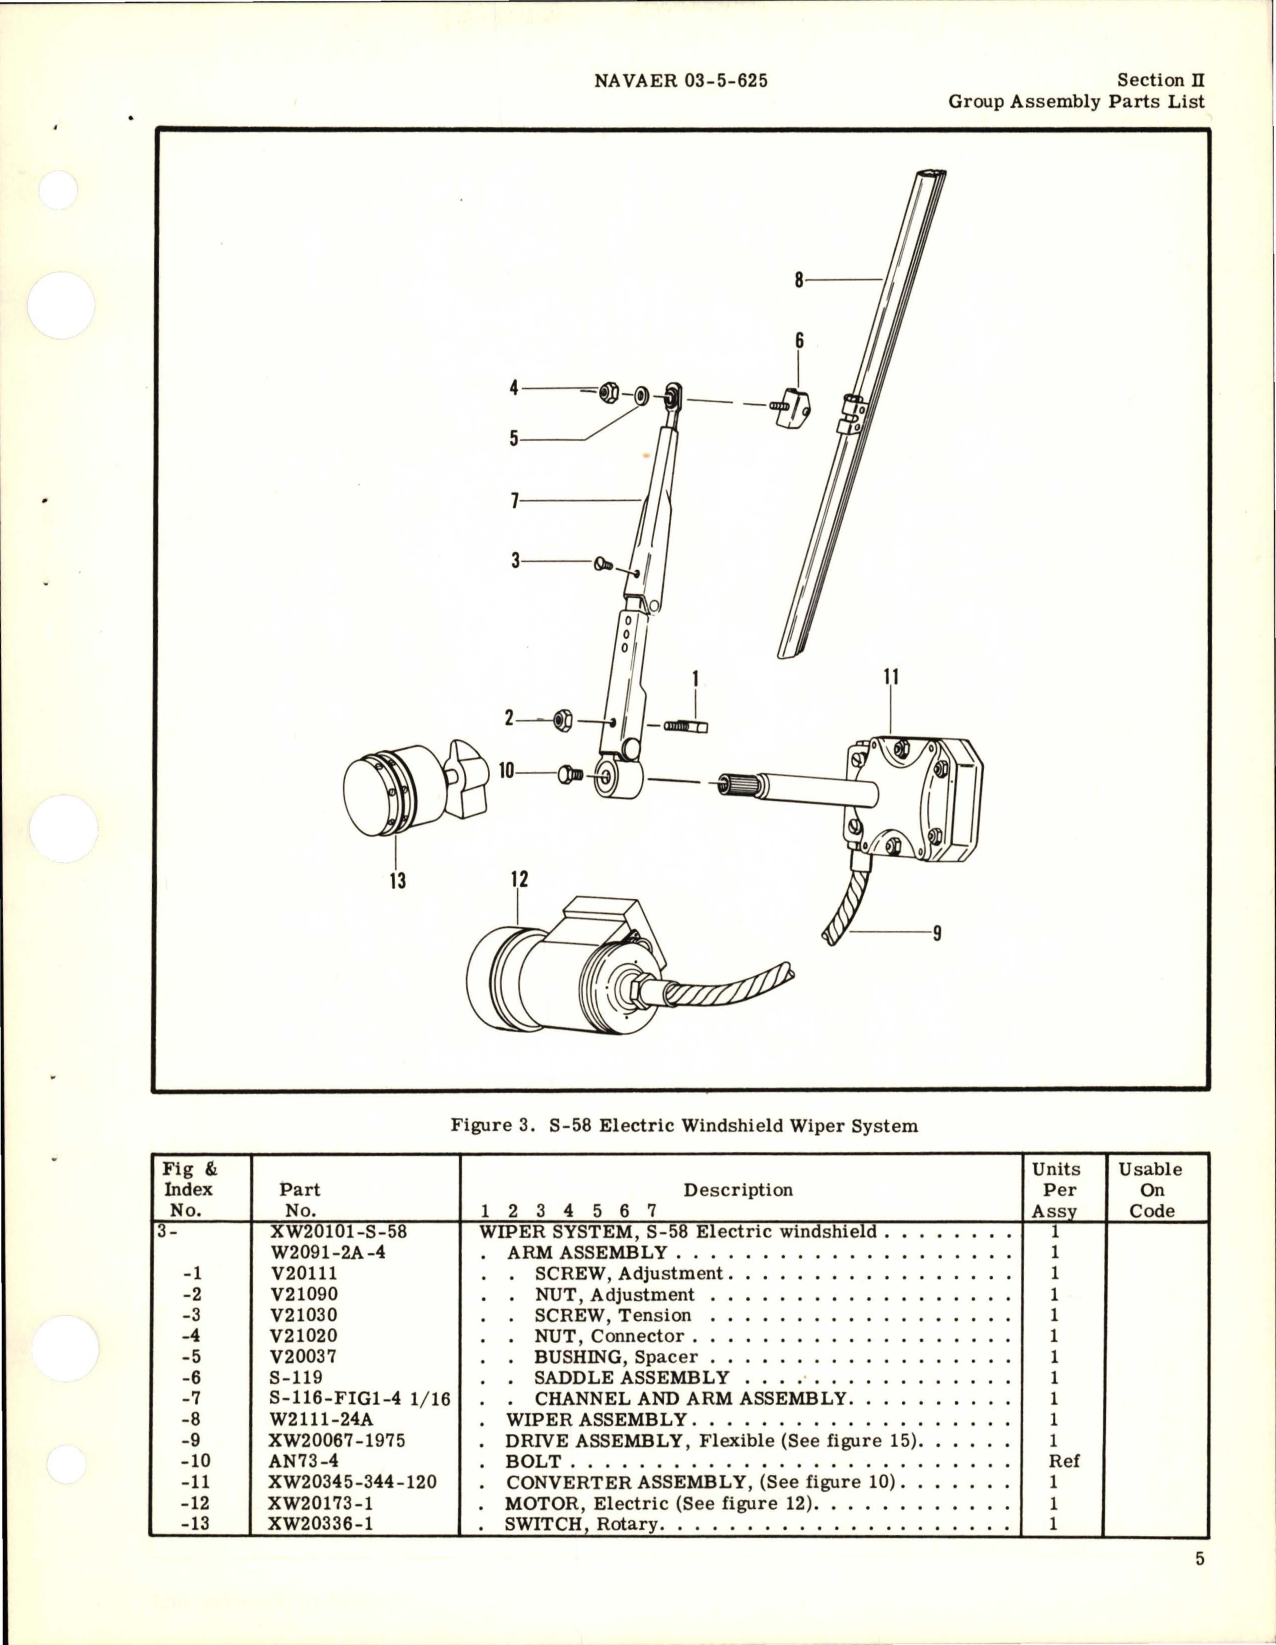 Sample page 7 from AirCorps Library document: Illustrated Parts Breakdown for Electric Windshield Wiper System 